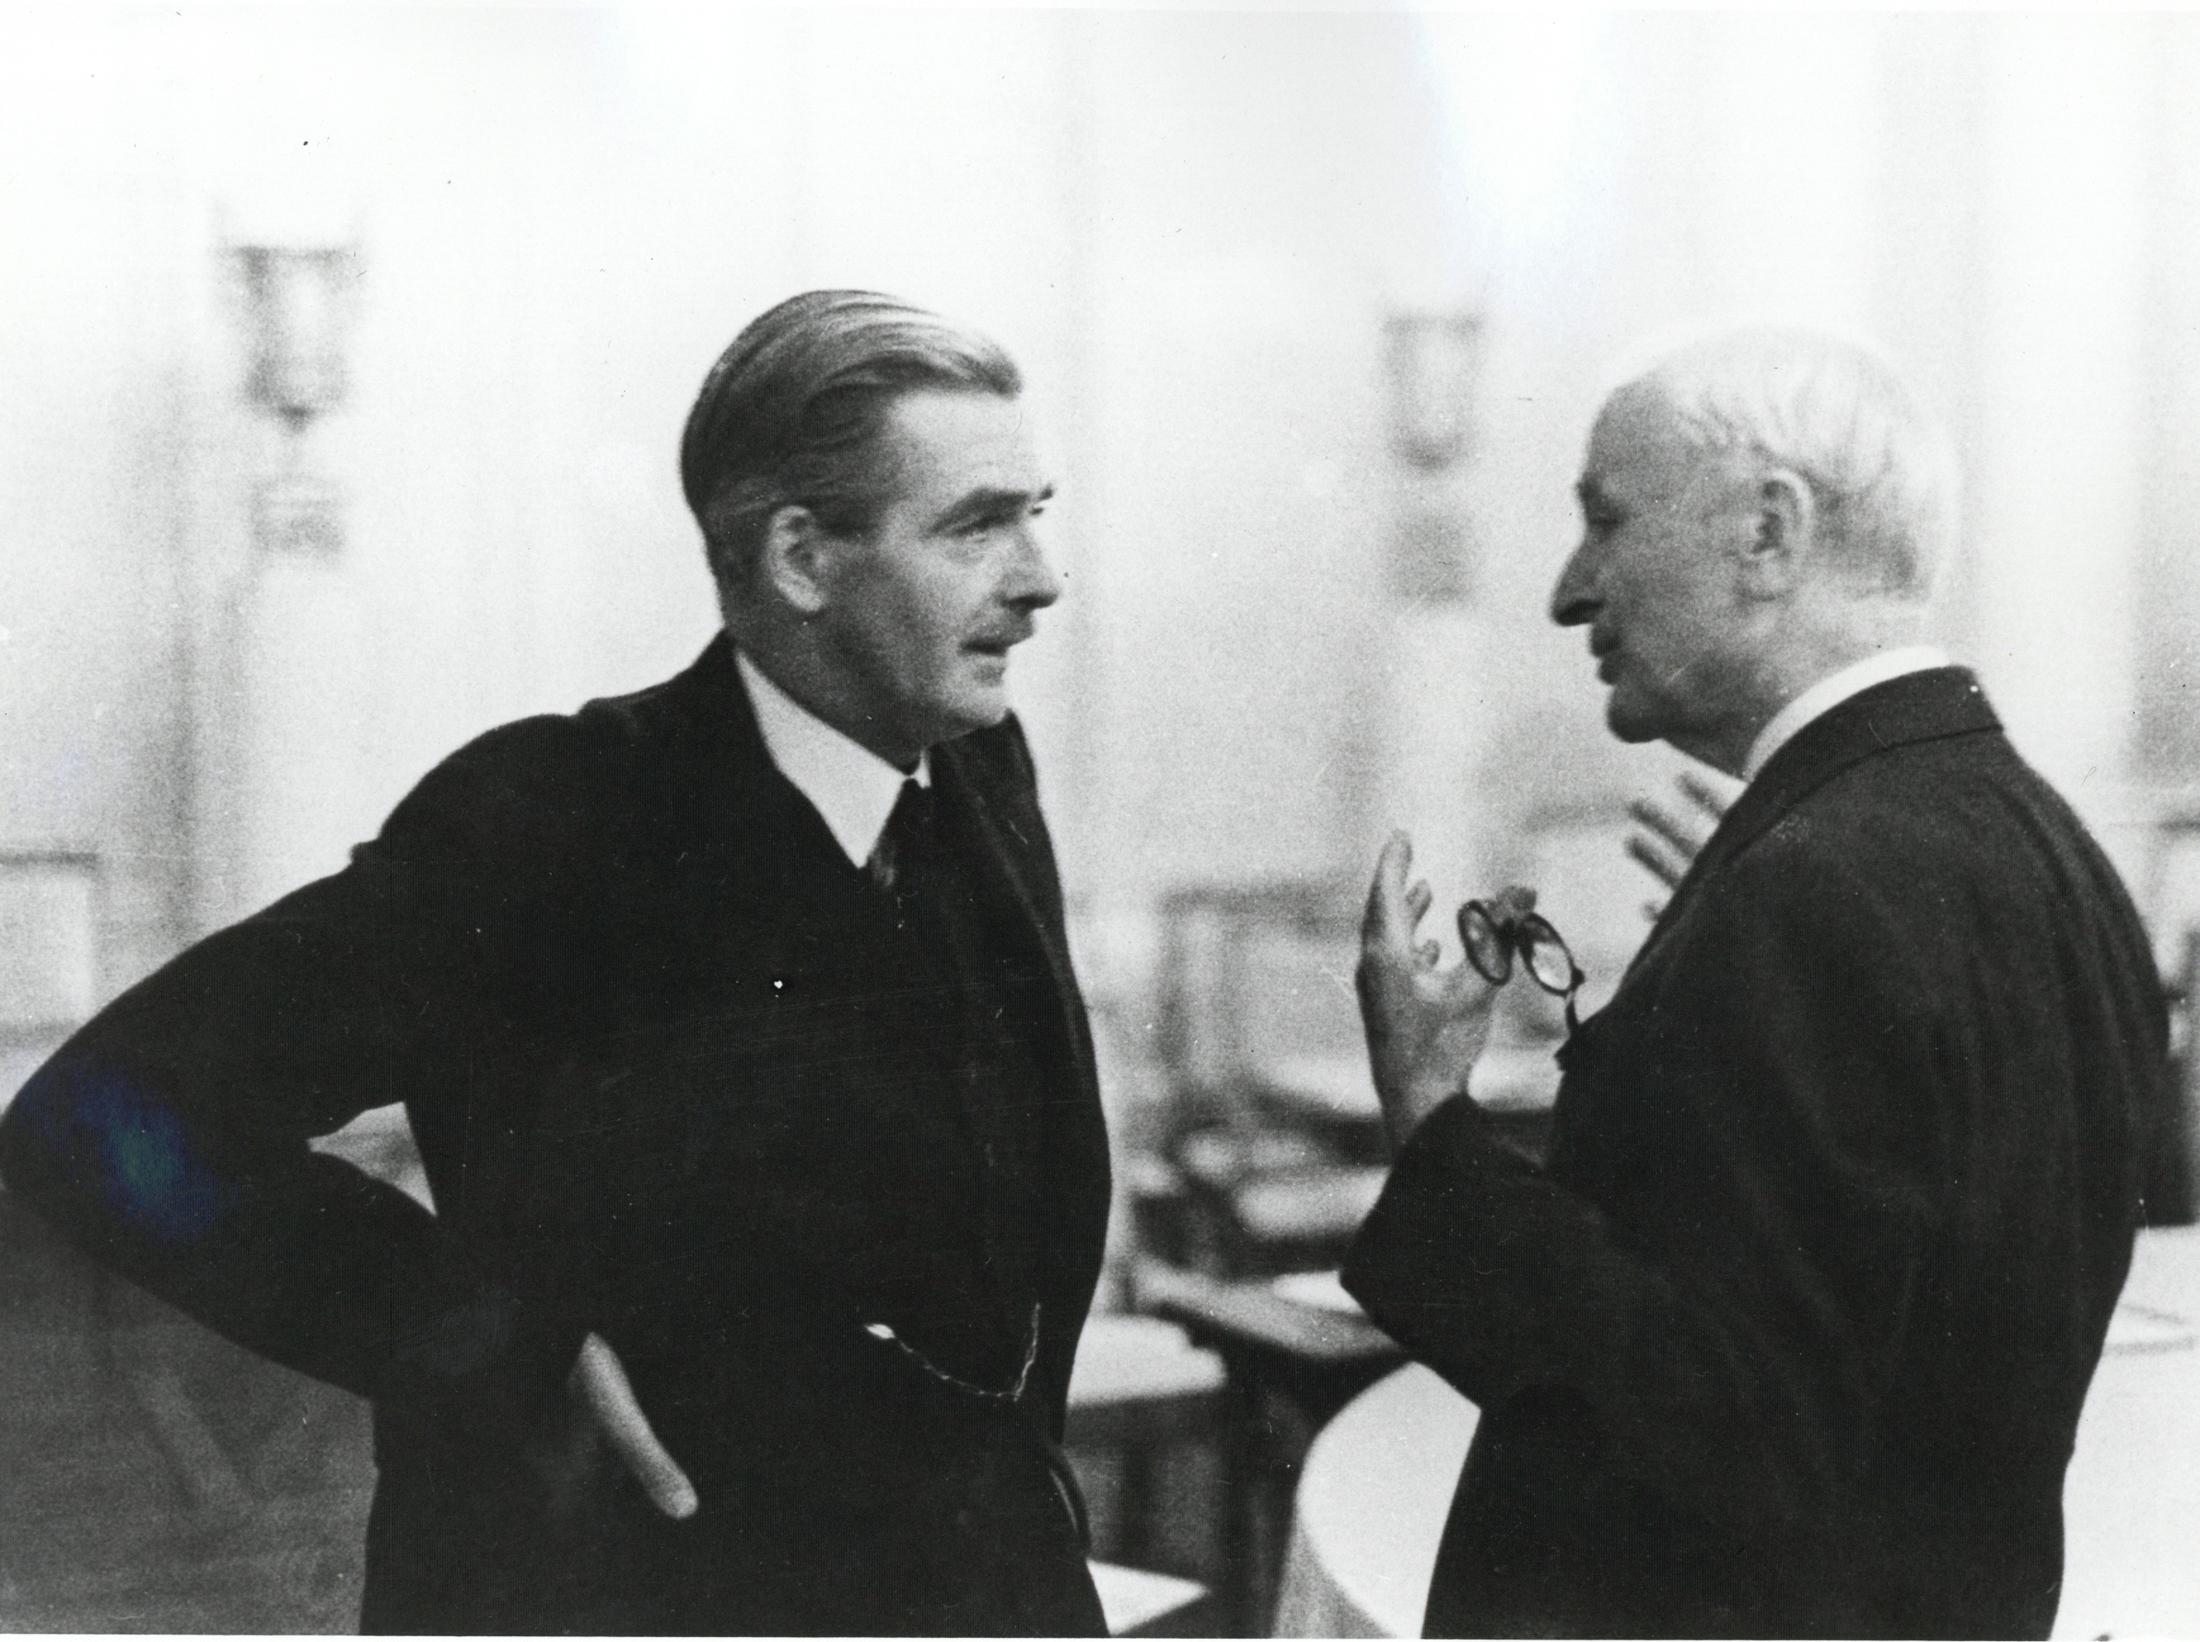 British Foreign Minister Anthony Eden and US Secretary of State Cordell Hull in conversation, date unknown